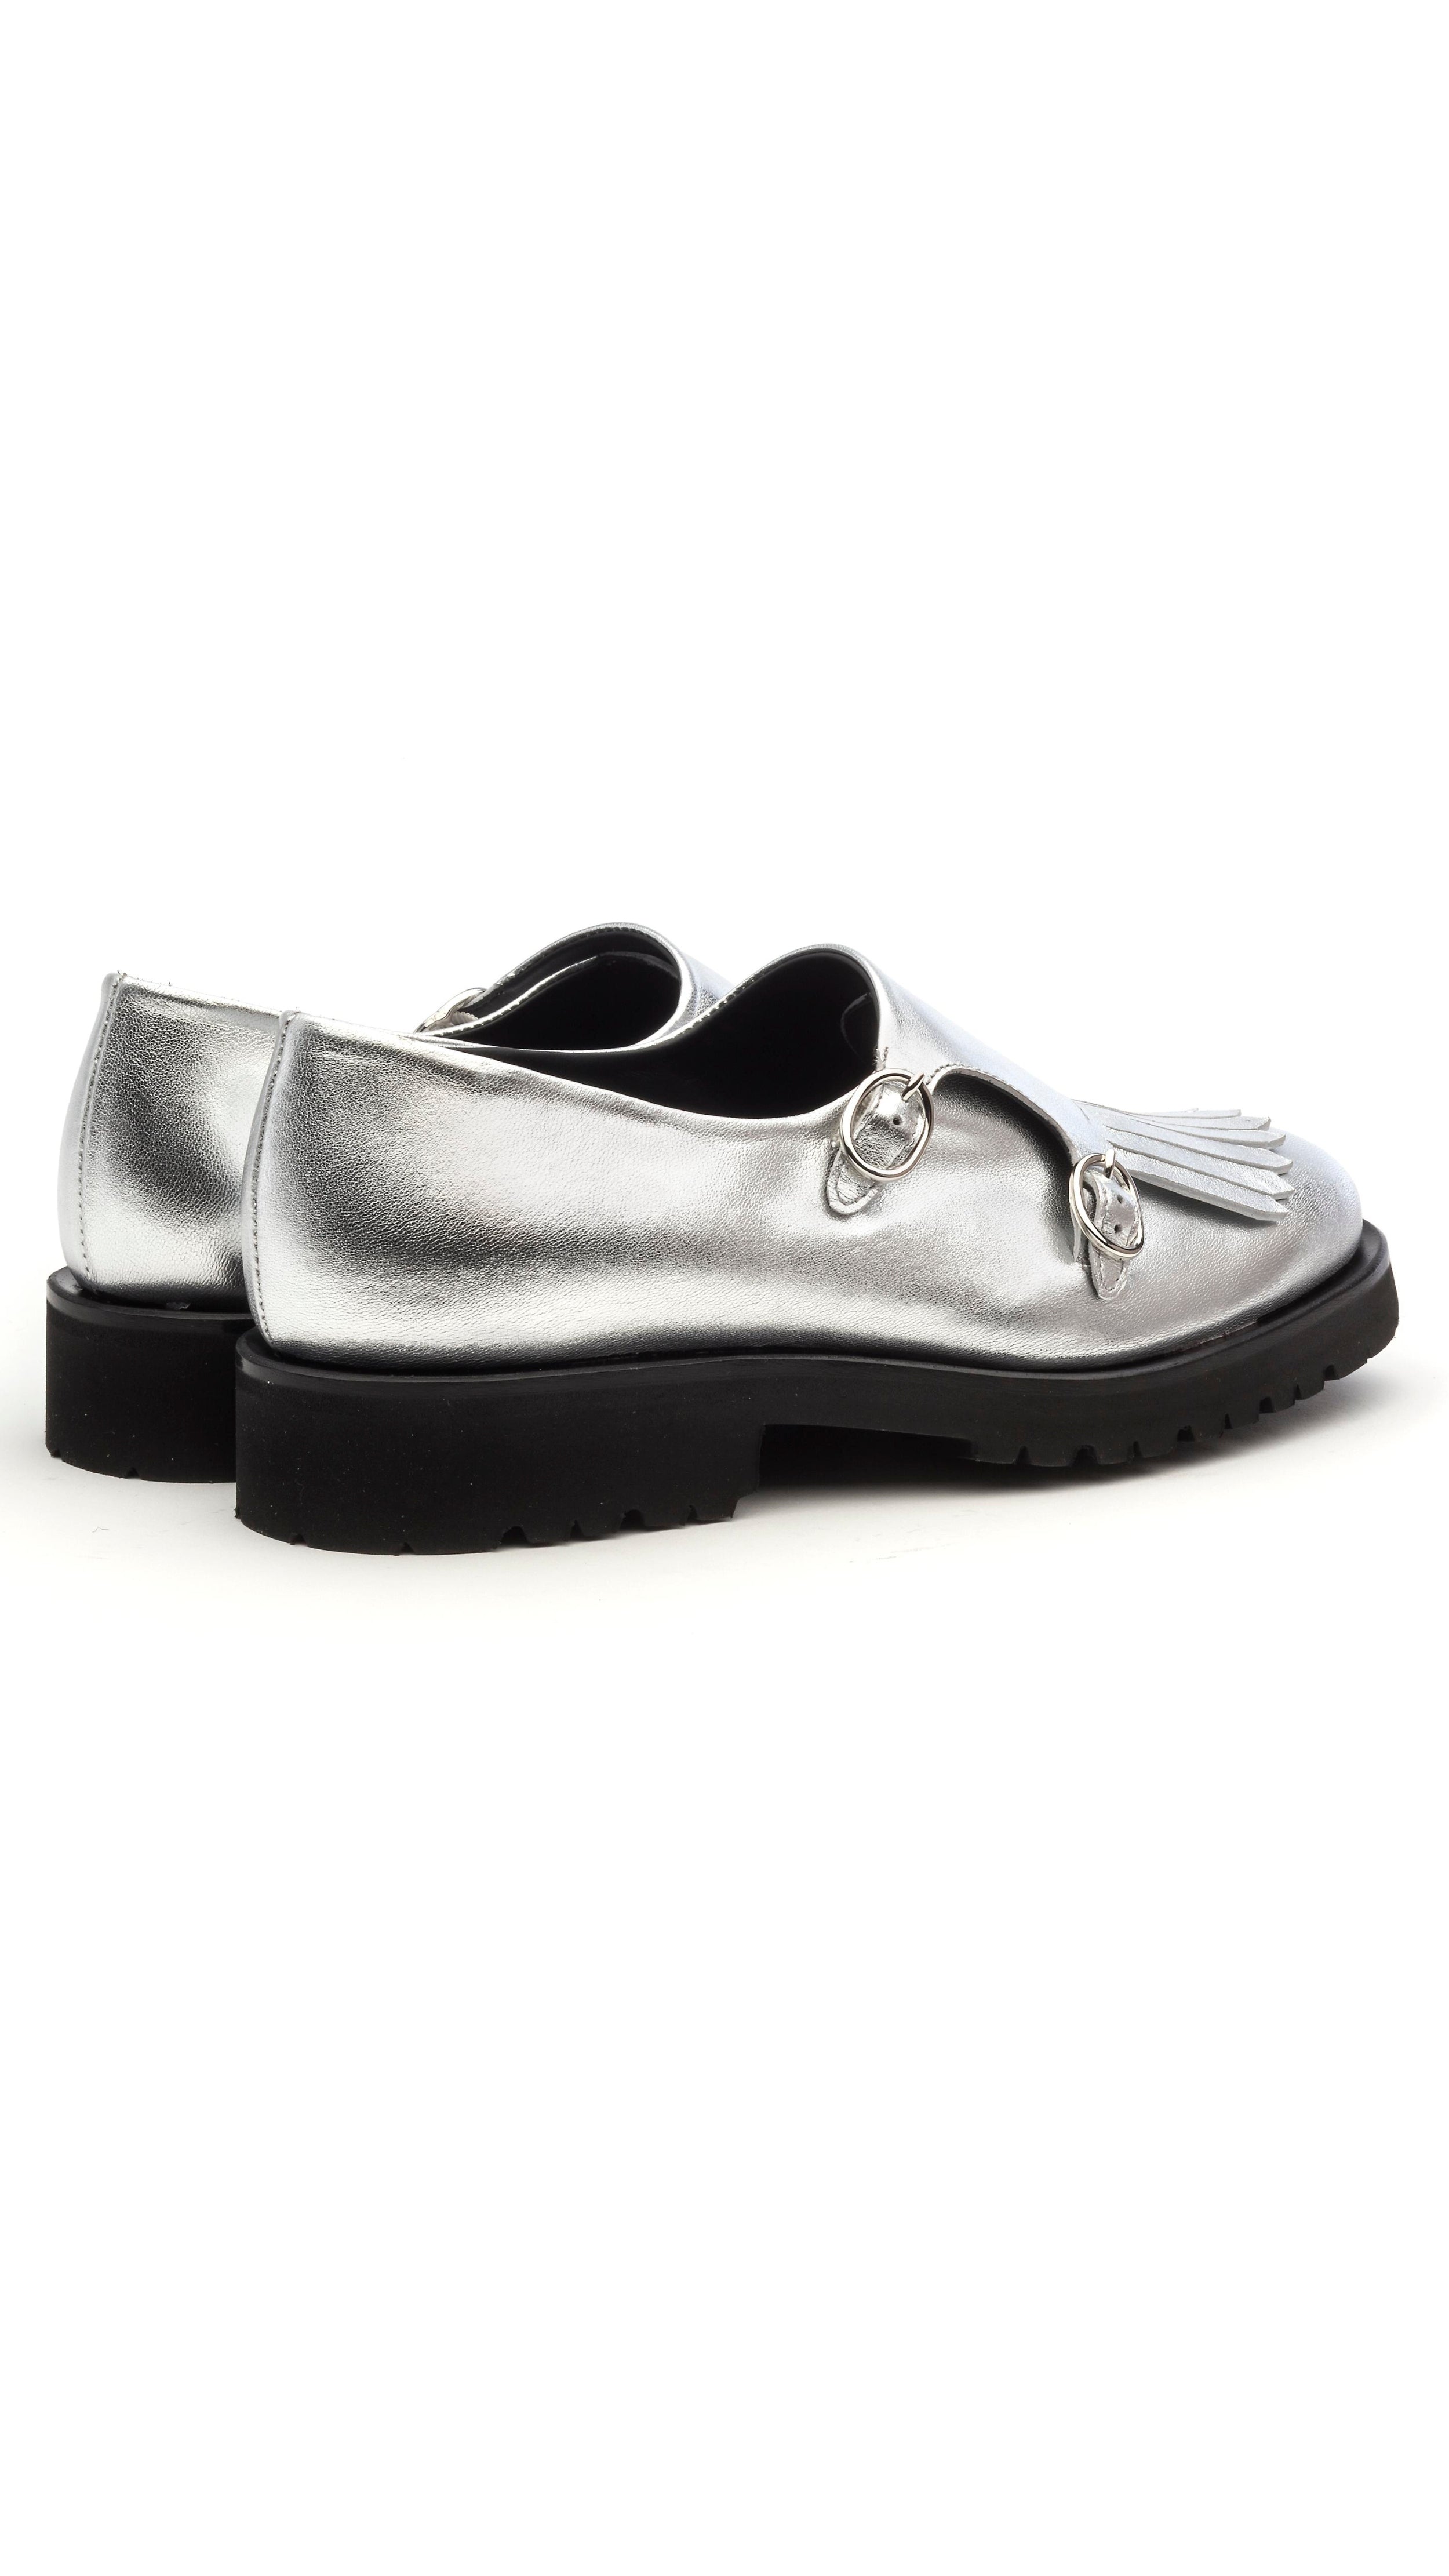 The Cedar Brogues are handcrafted in Italy with luxurious soft metallic silver calf skin. They have side buckles and fringing to the toe for a distinctive finish. The 10mm platform heel. Photo facing the back and side.